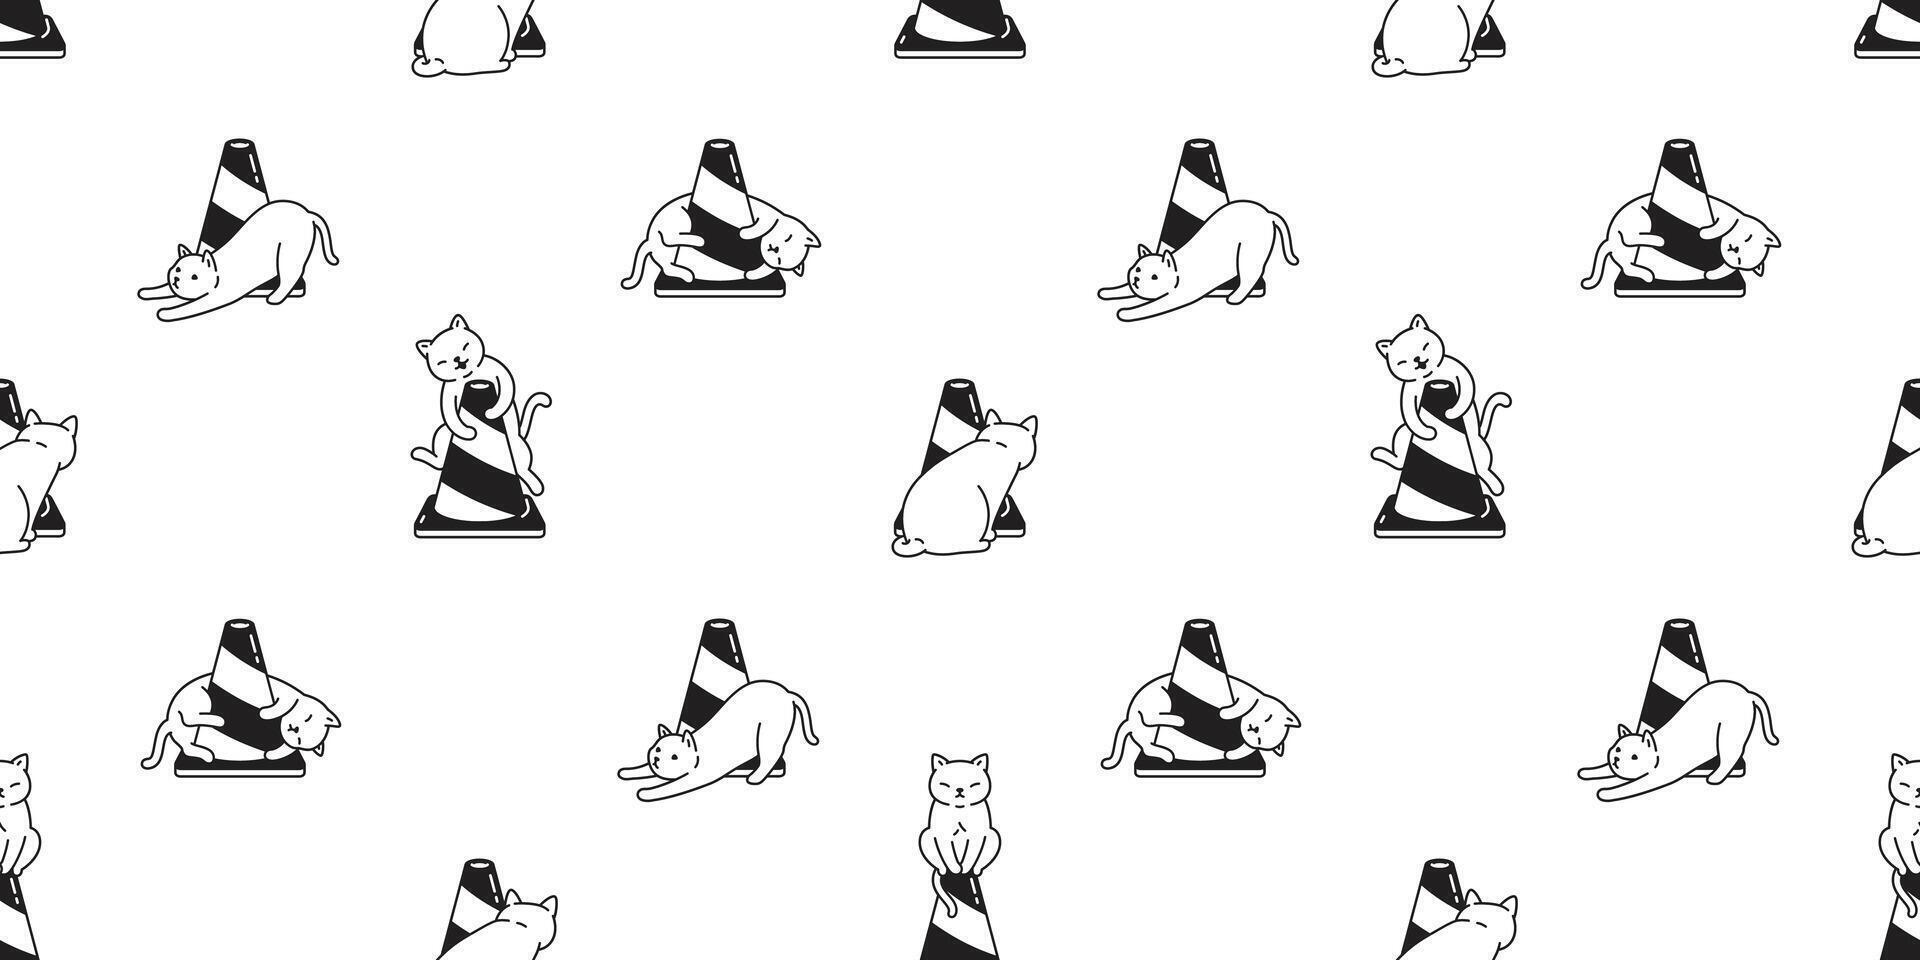 cat seamless pattern kitten calico traffic cone breed pet scarf isolated cartoon animal tile wallpaper repeat background illustration doodle design vector